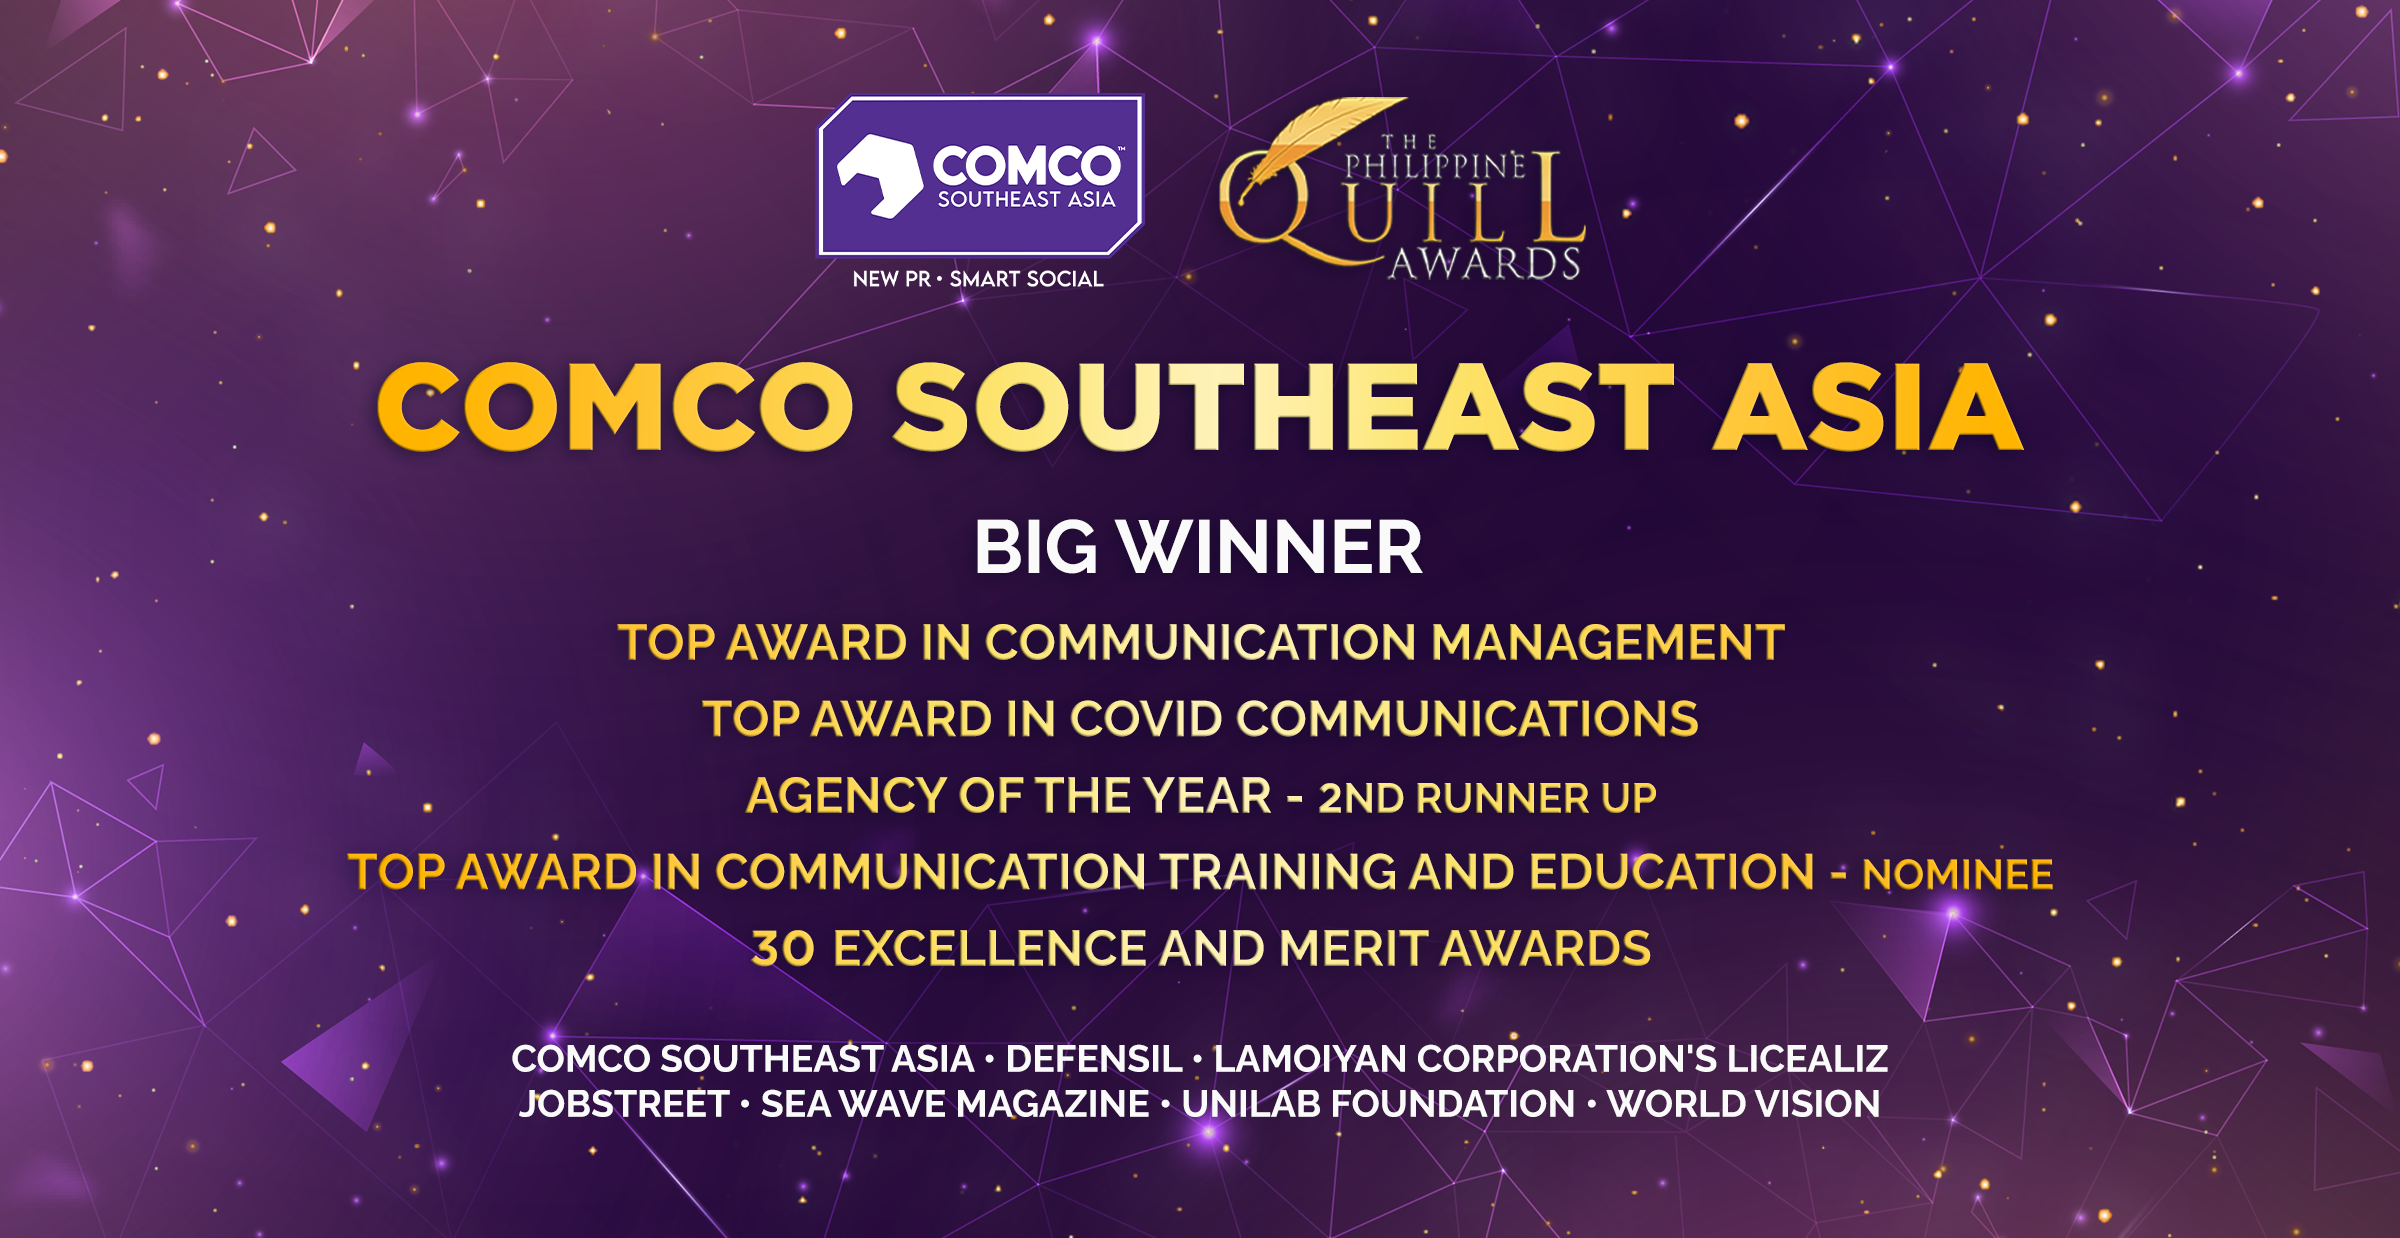 COMCO SEA wins big in the 19th Philippine Quill with 3 Top Awards and 30 Metals